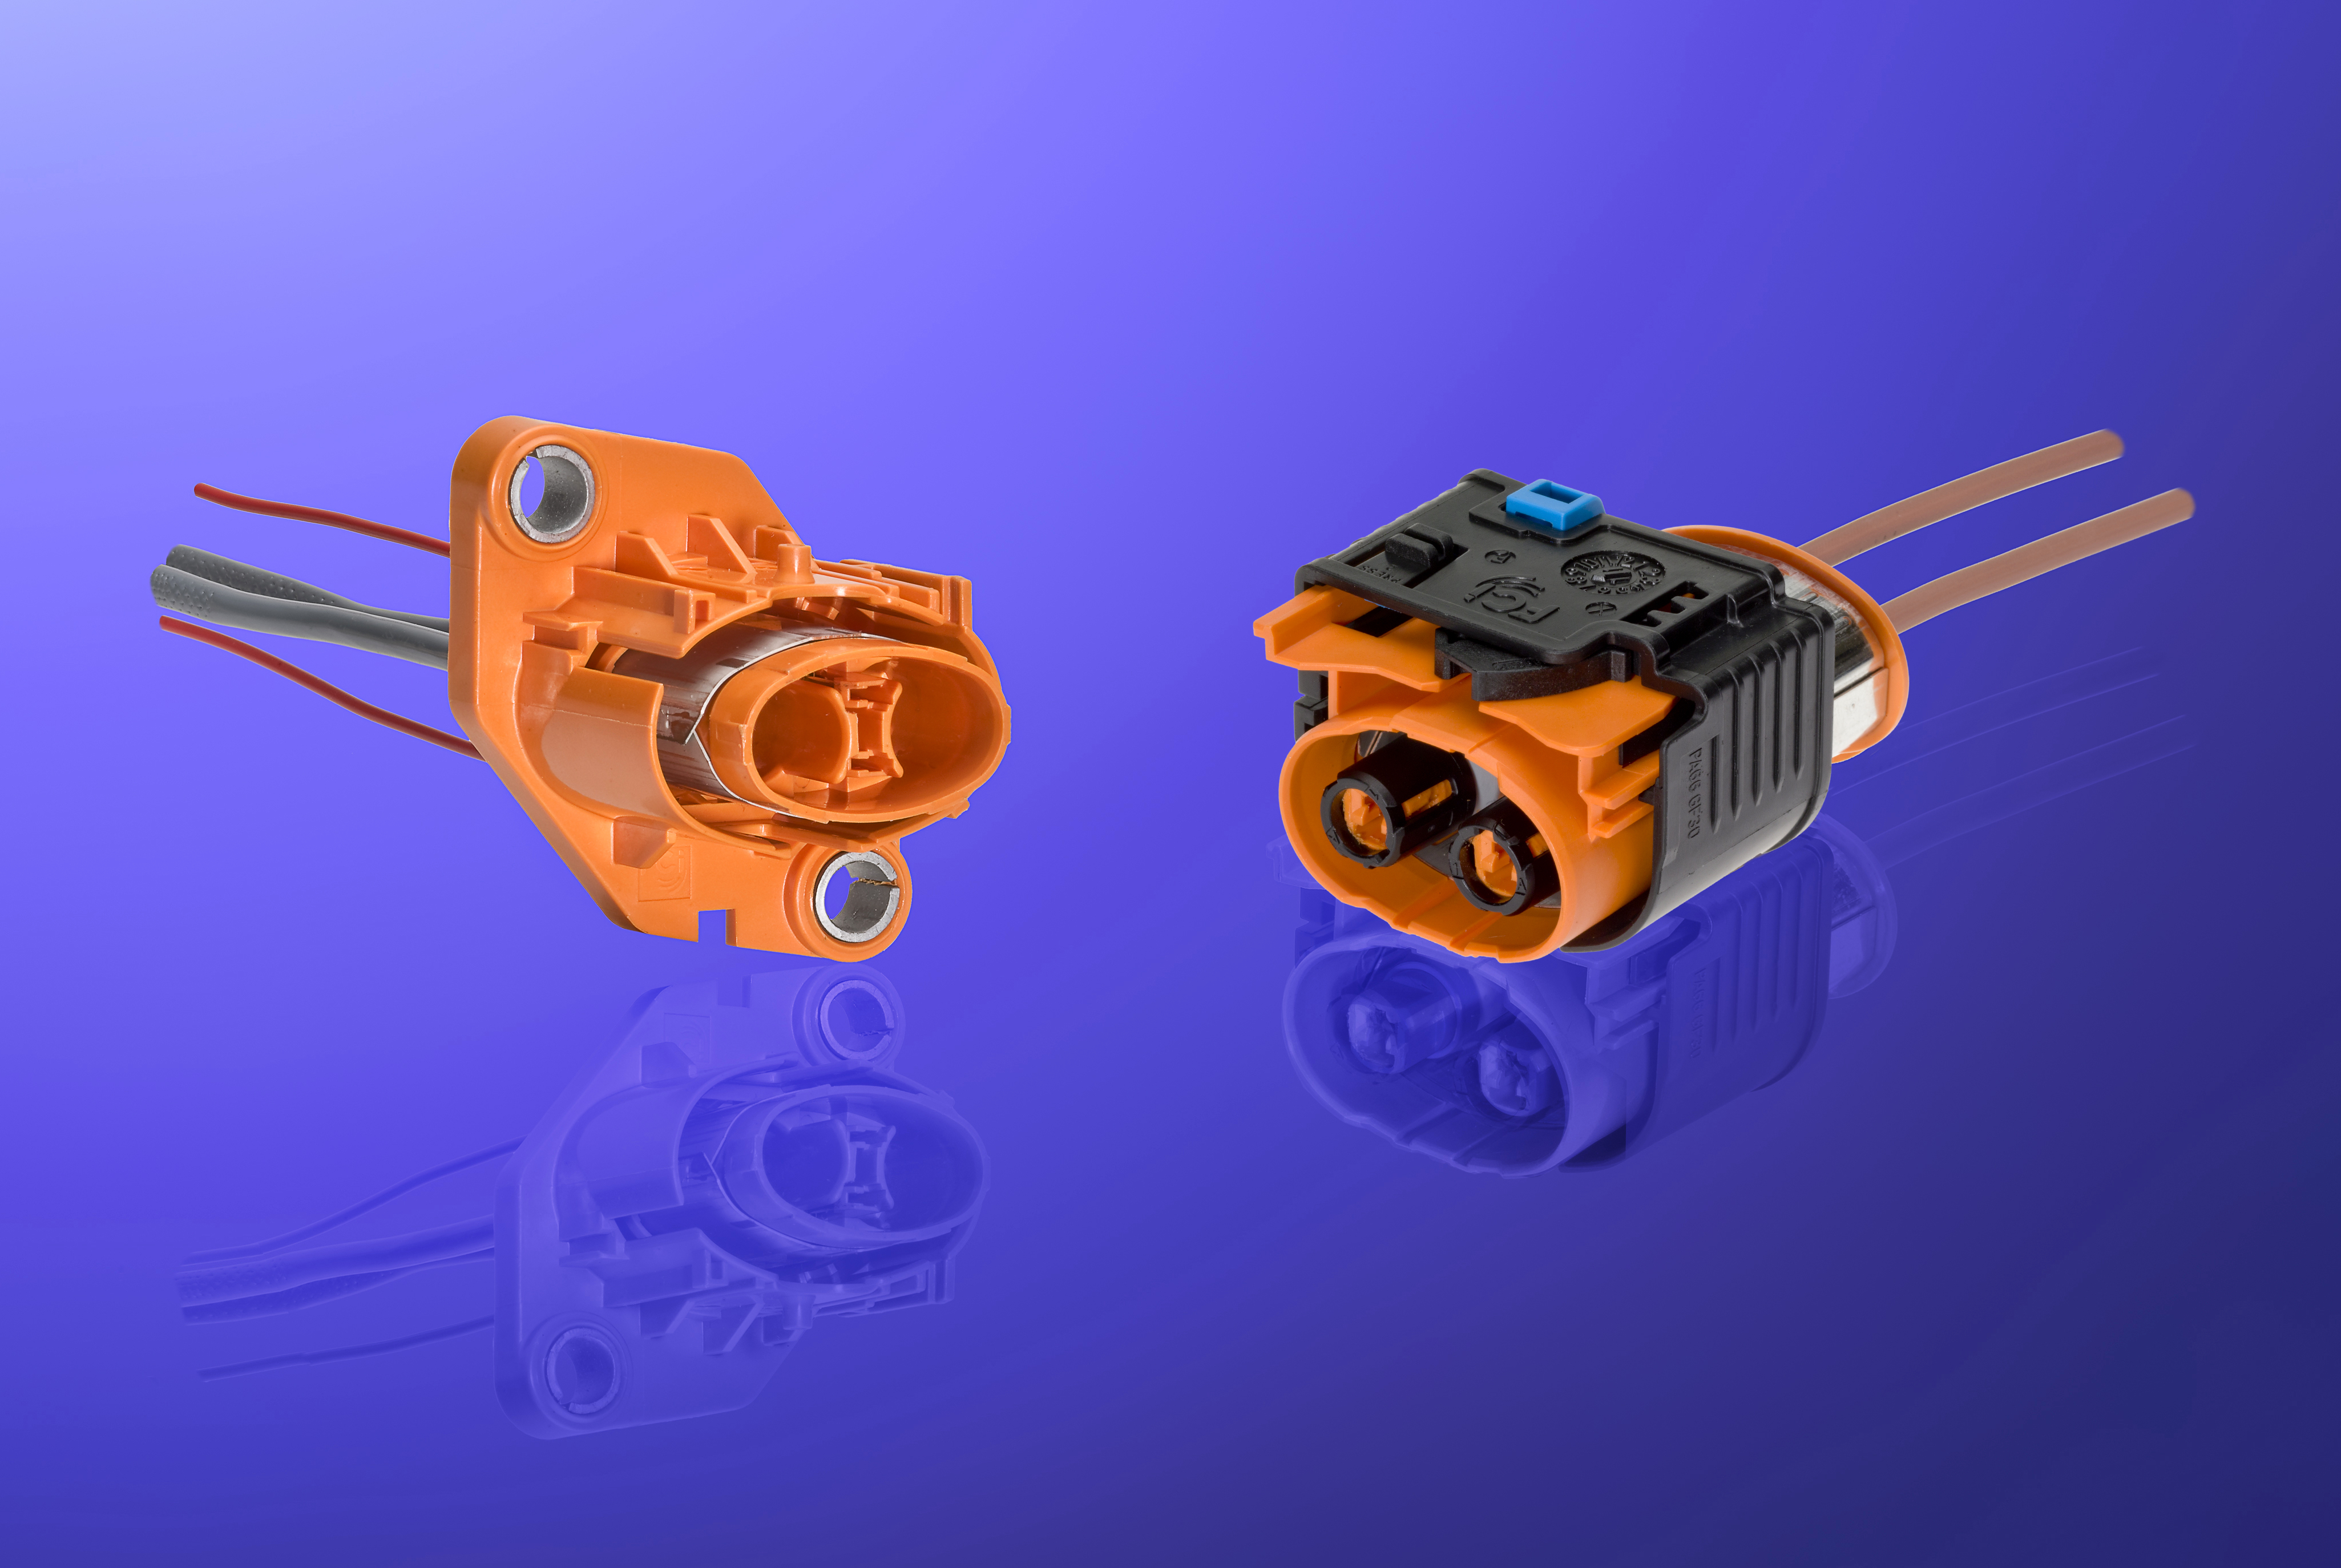 High-Voltage and High-Current Connector Products: Power & Signal Group stocks Aptiv’s (formerly Delphi’s) portfolio of high-voltage and high-current connector technologies for EV and HEV applications